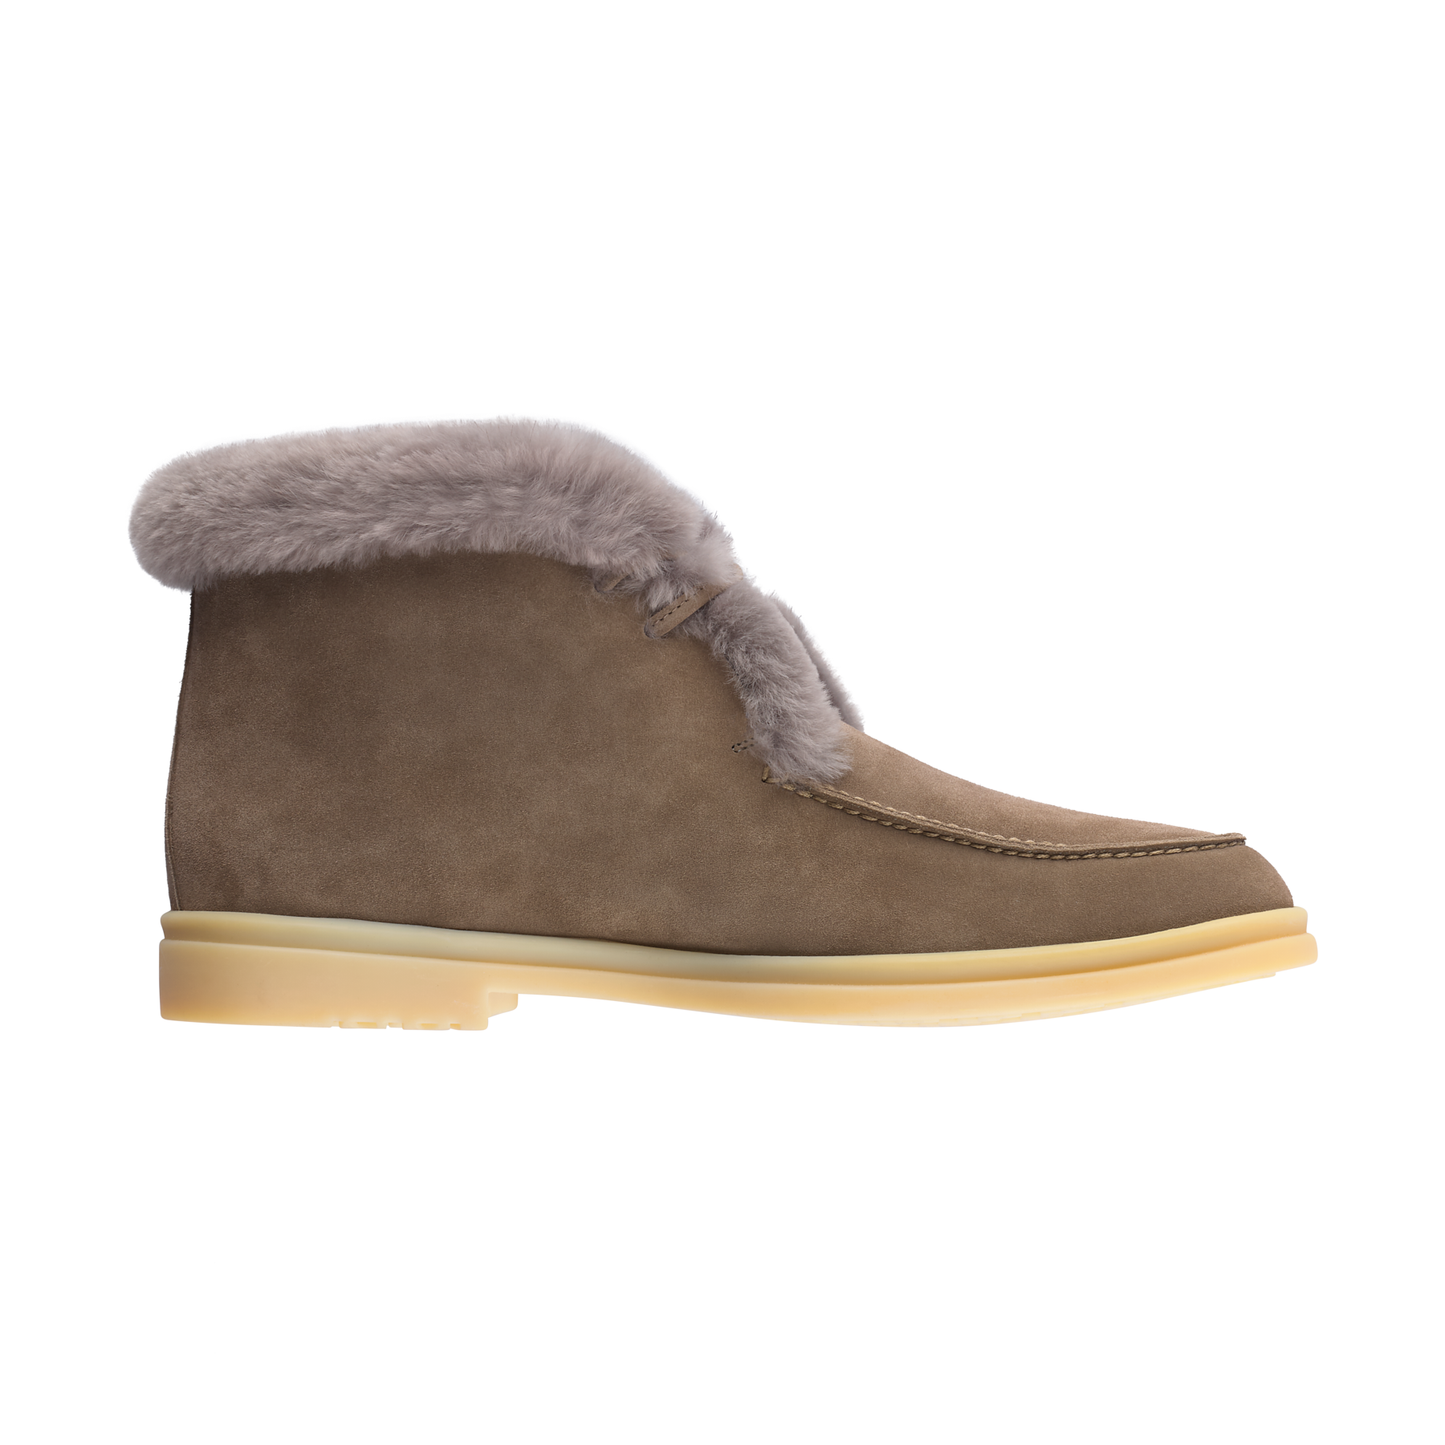 Walk and Walk Suede Ankle Boot in Taupe